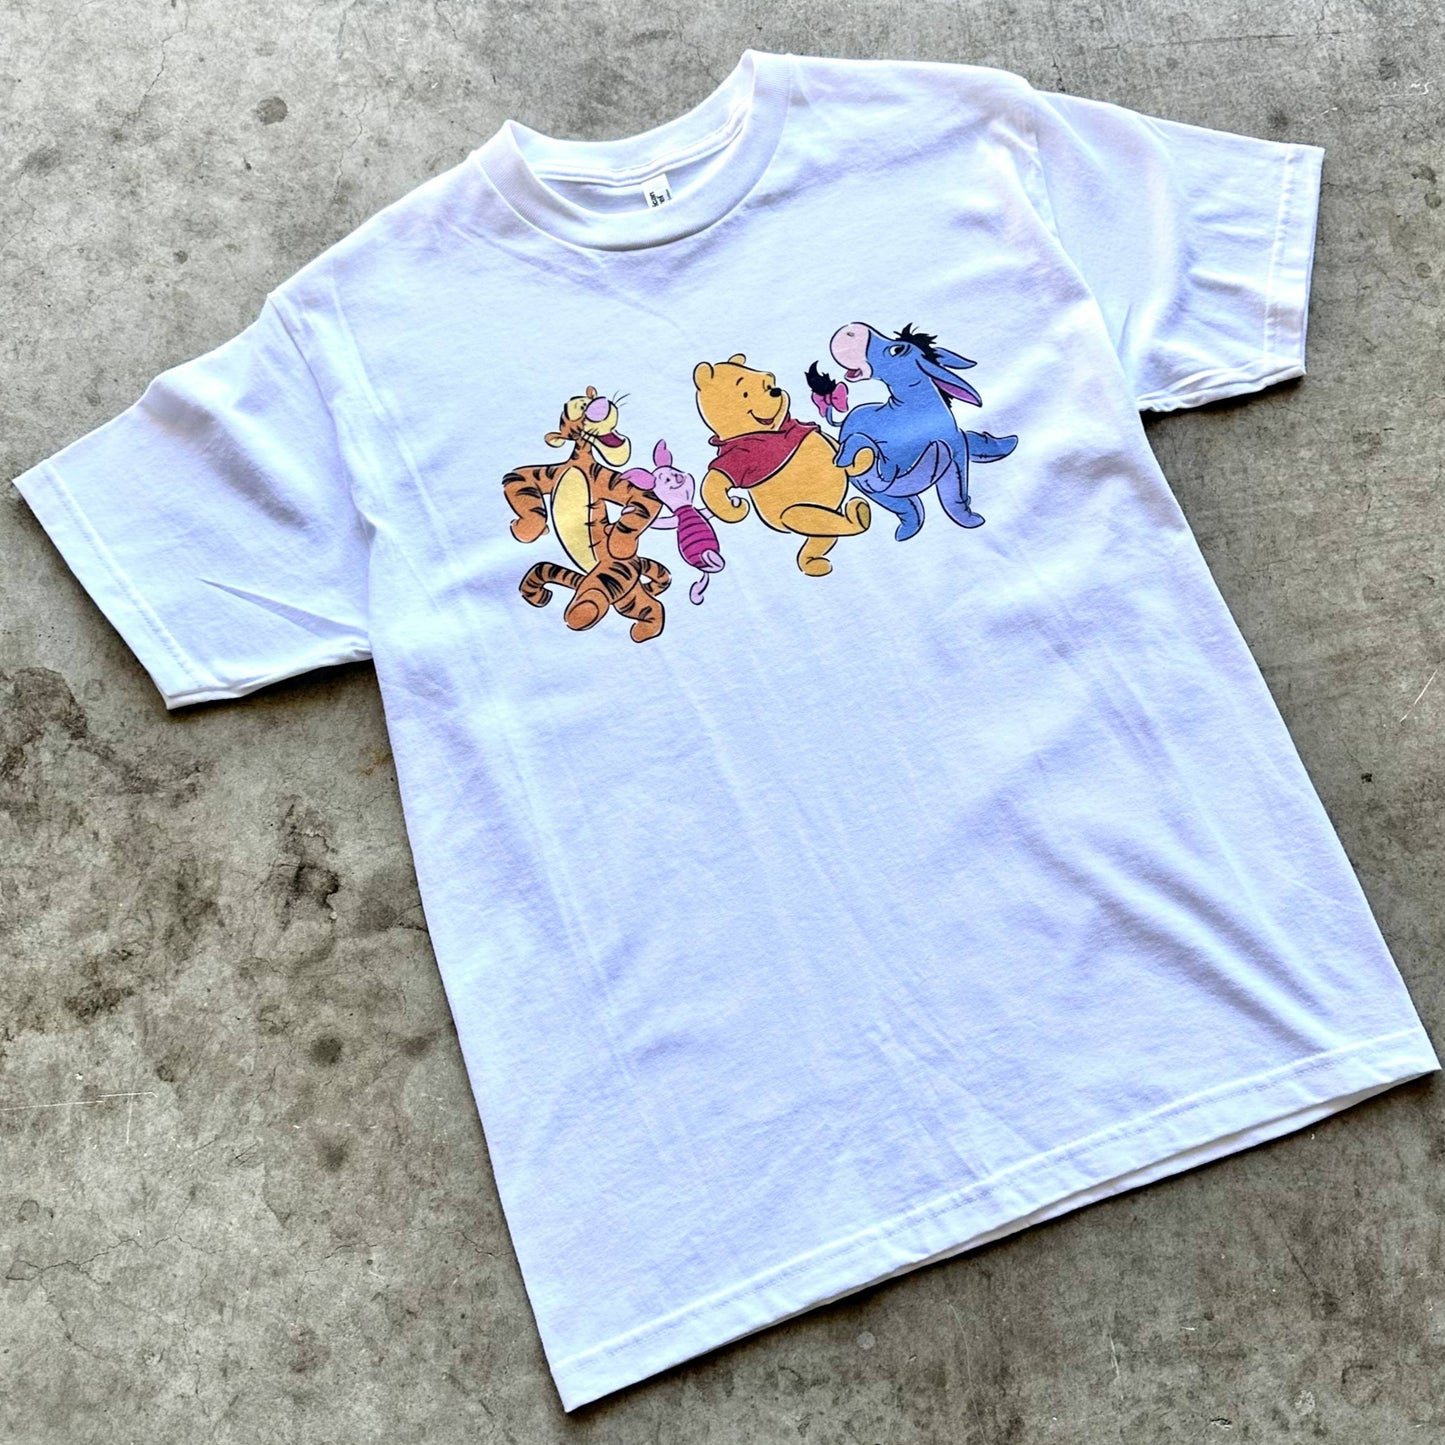 Winnie the Pooh Character Graphic Tee